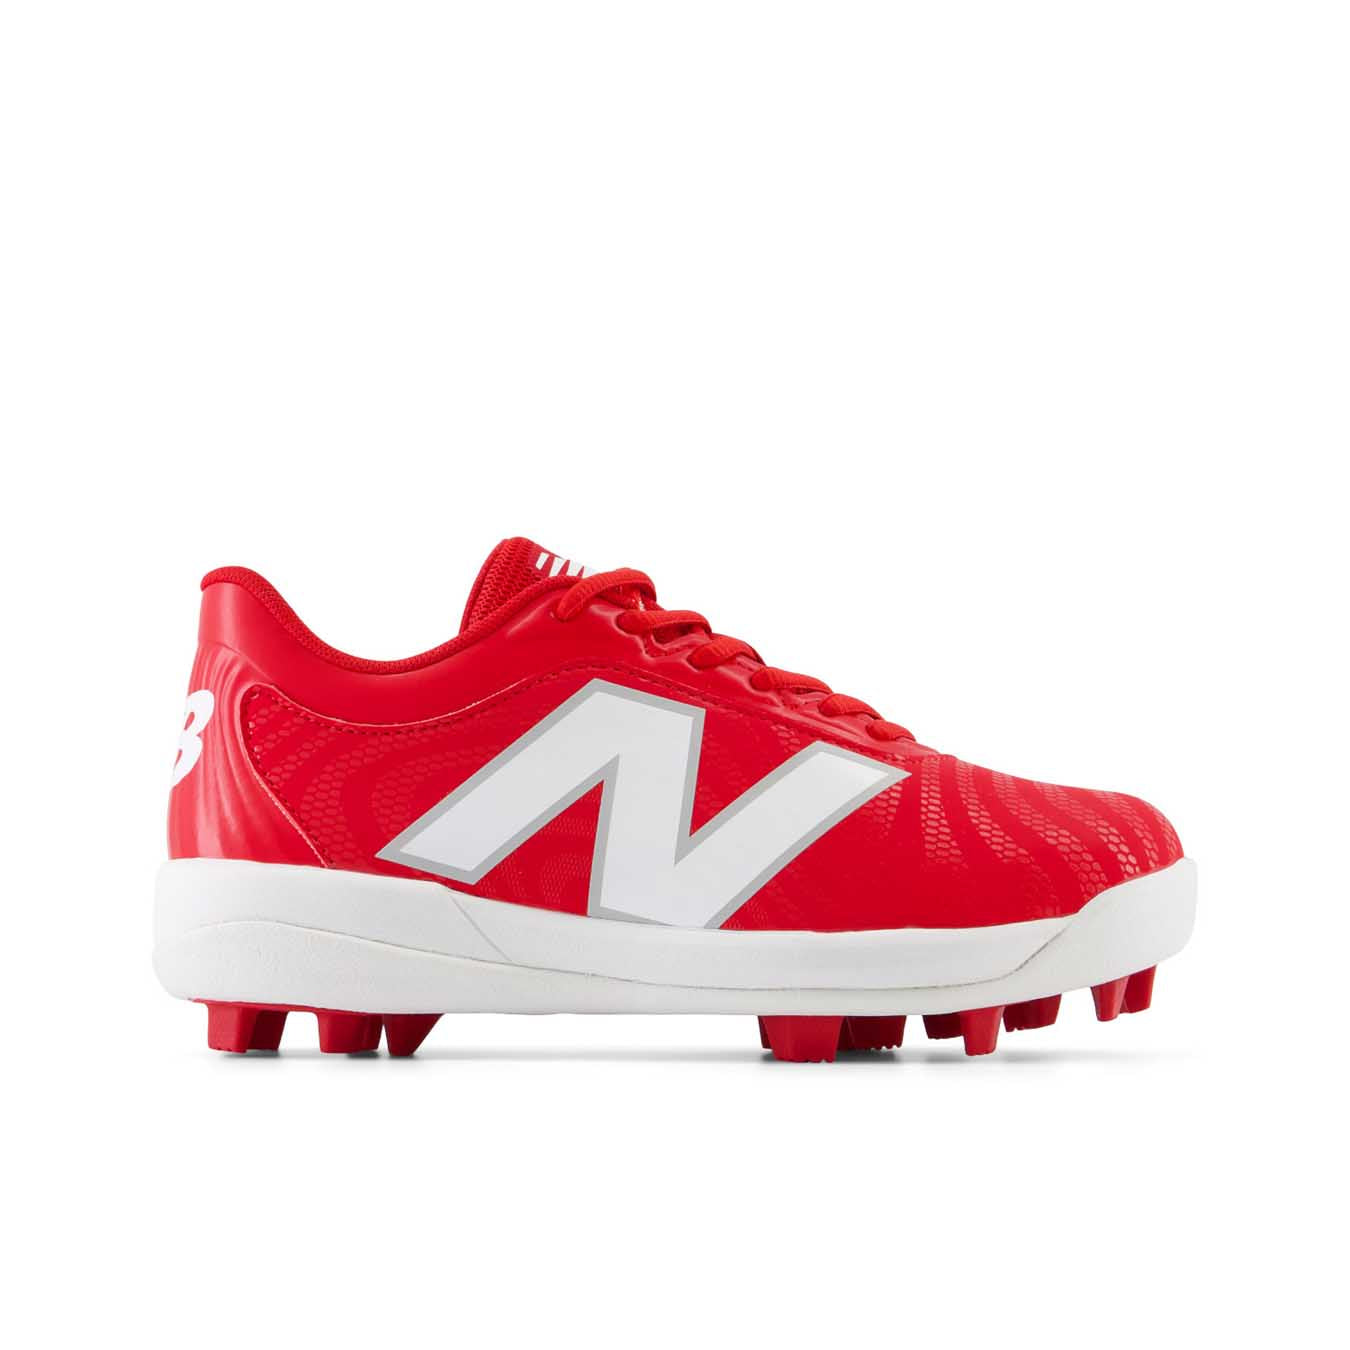 New Balance J4040v7 Youth Molded Rubber Cleats